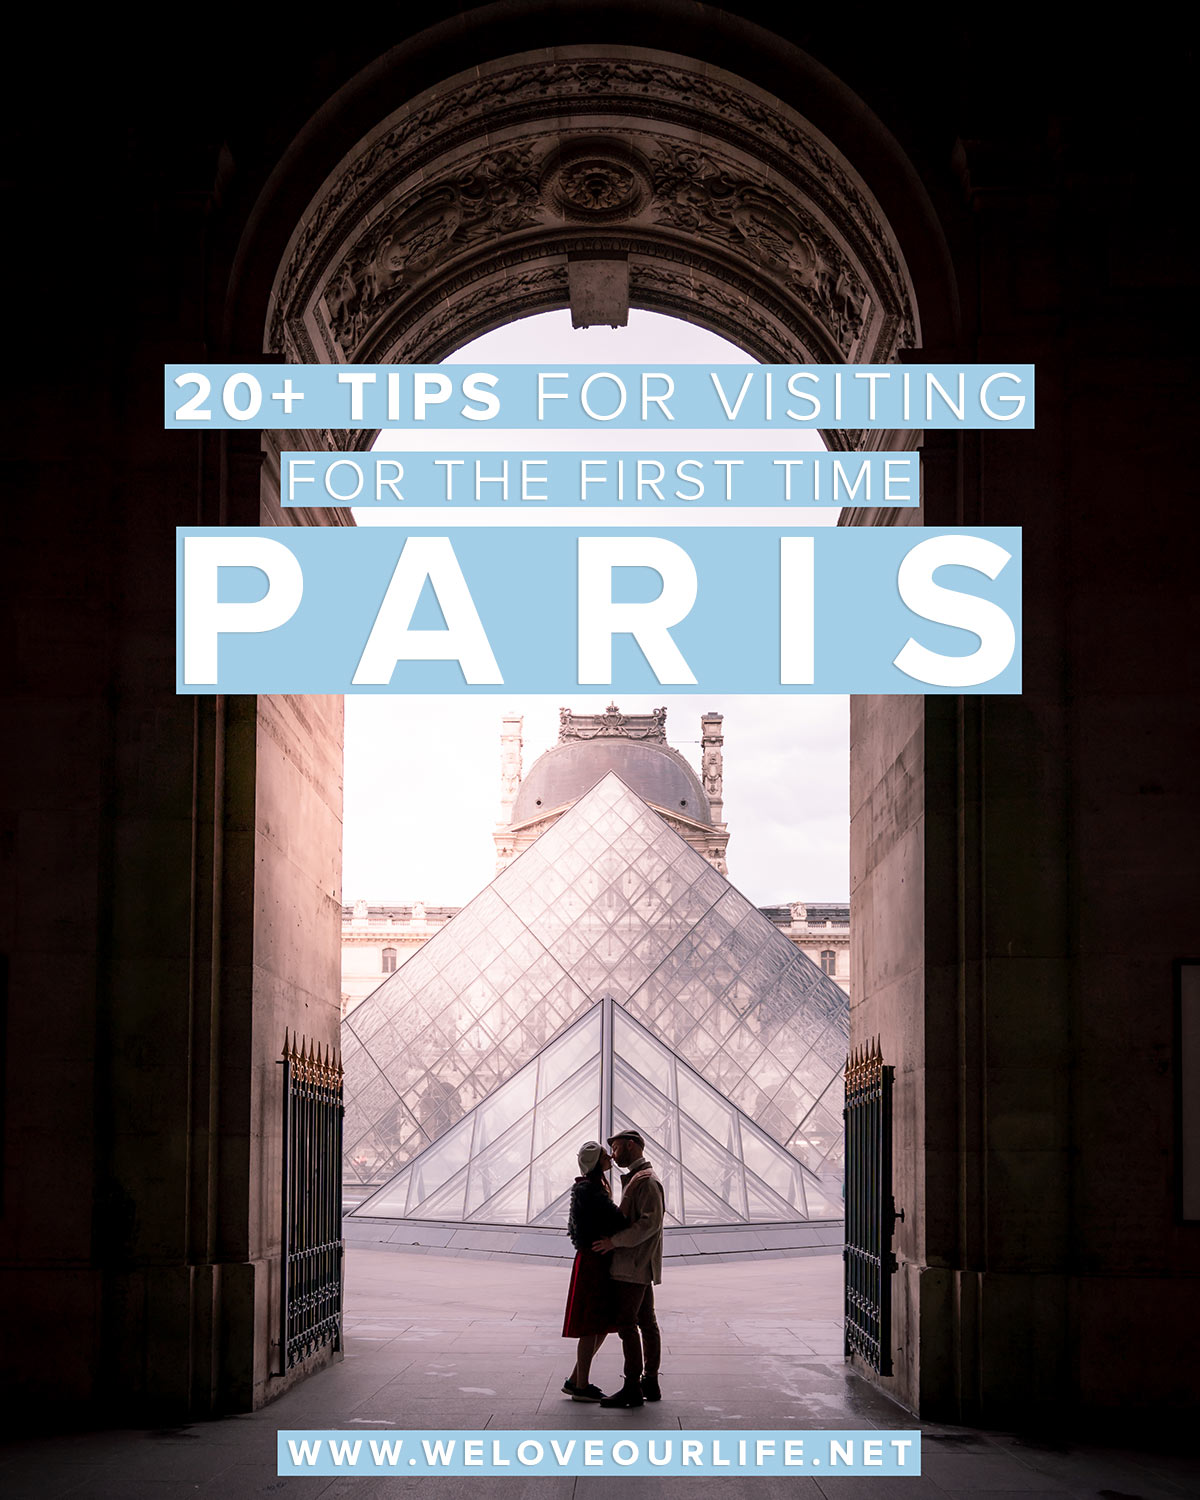 20+ Tips For Visiting Paris For The First Time